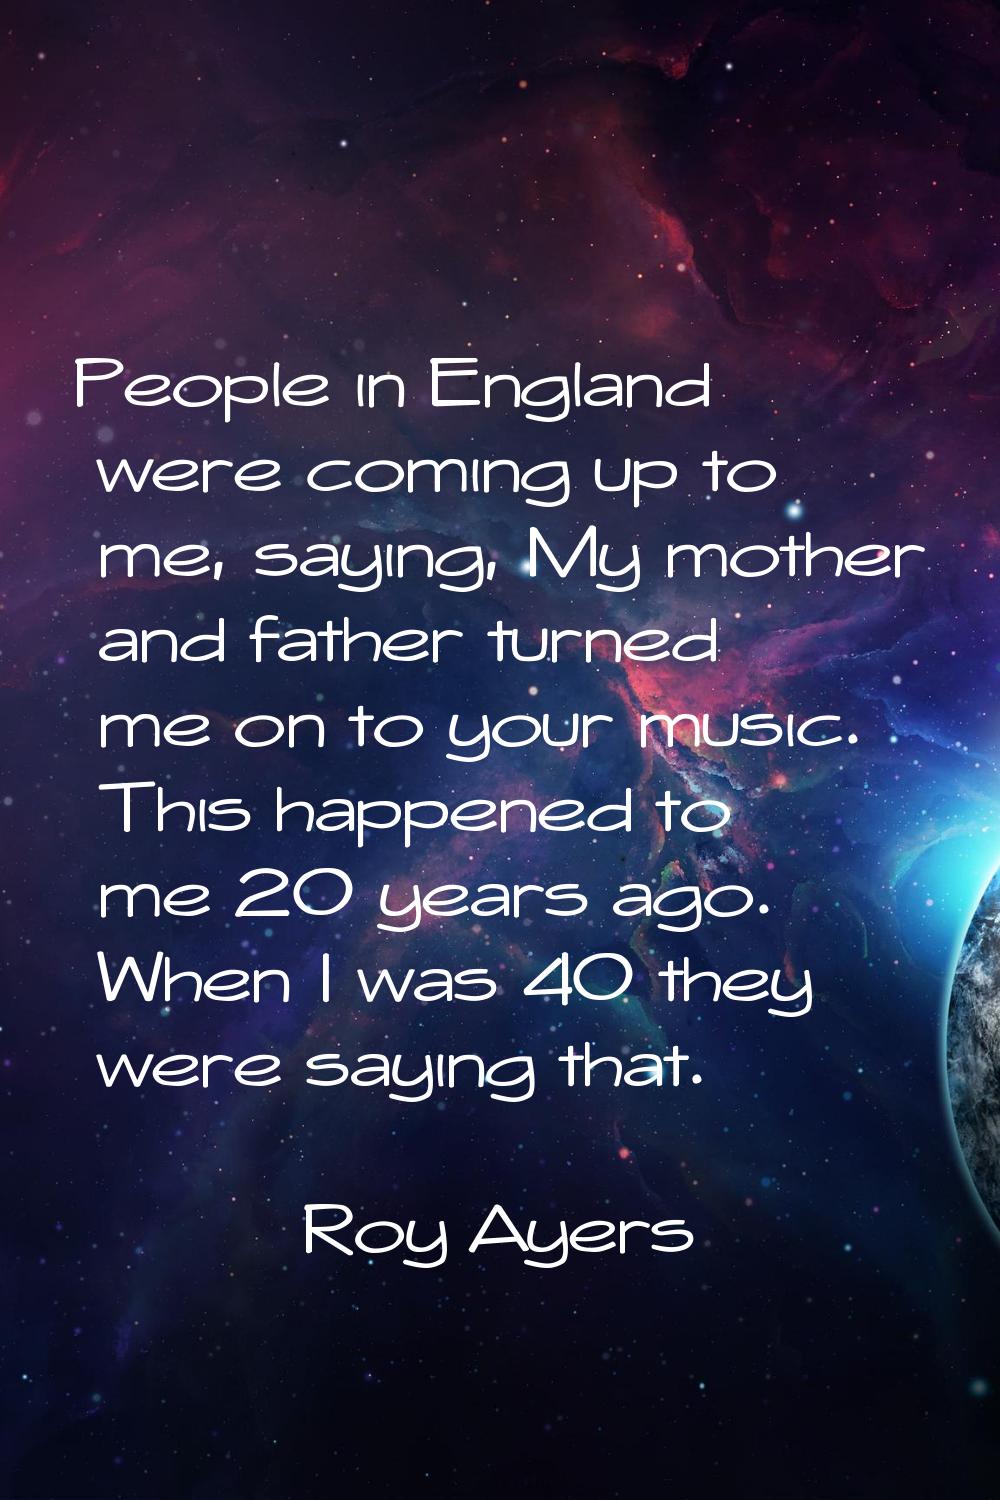 People in England were coming up to me, saying, My mother and father turned me on to your music. Th